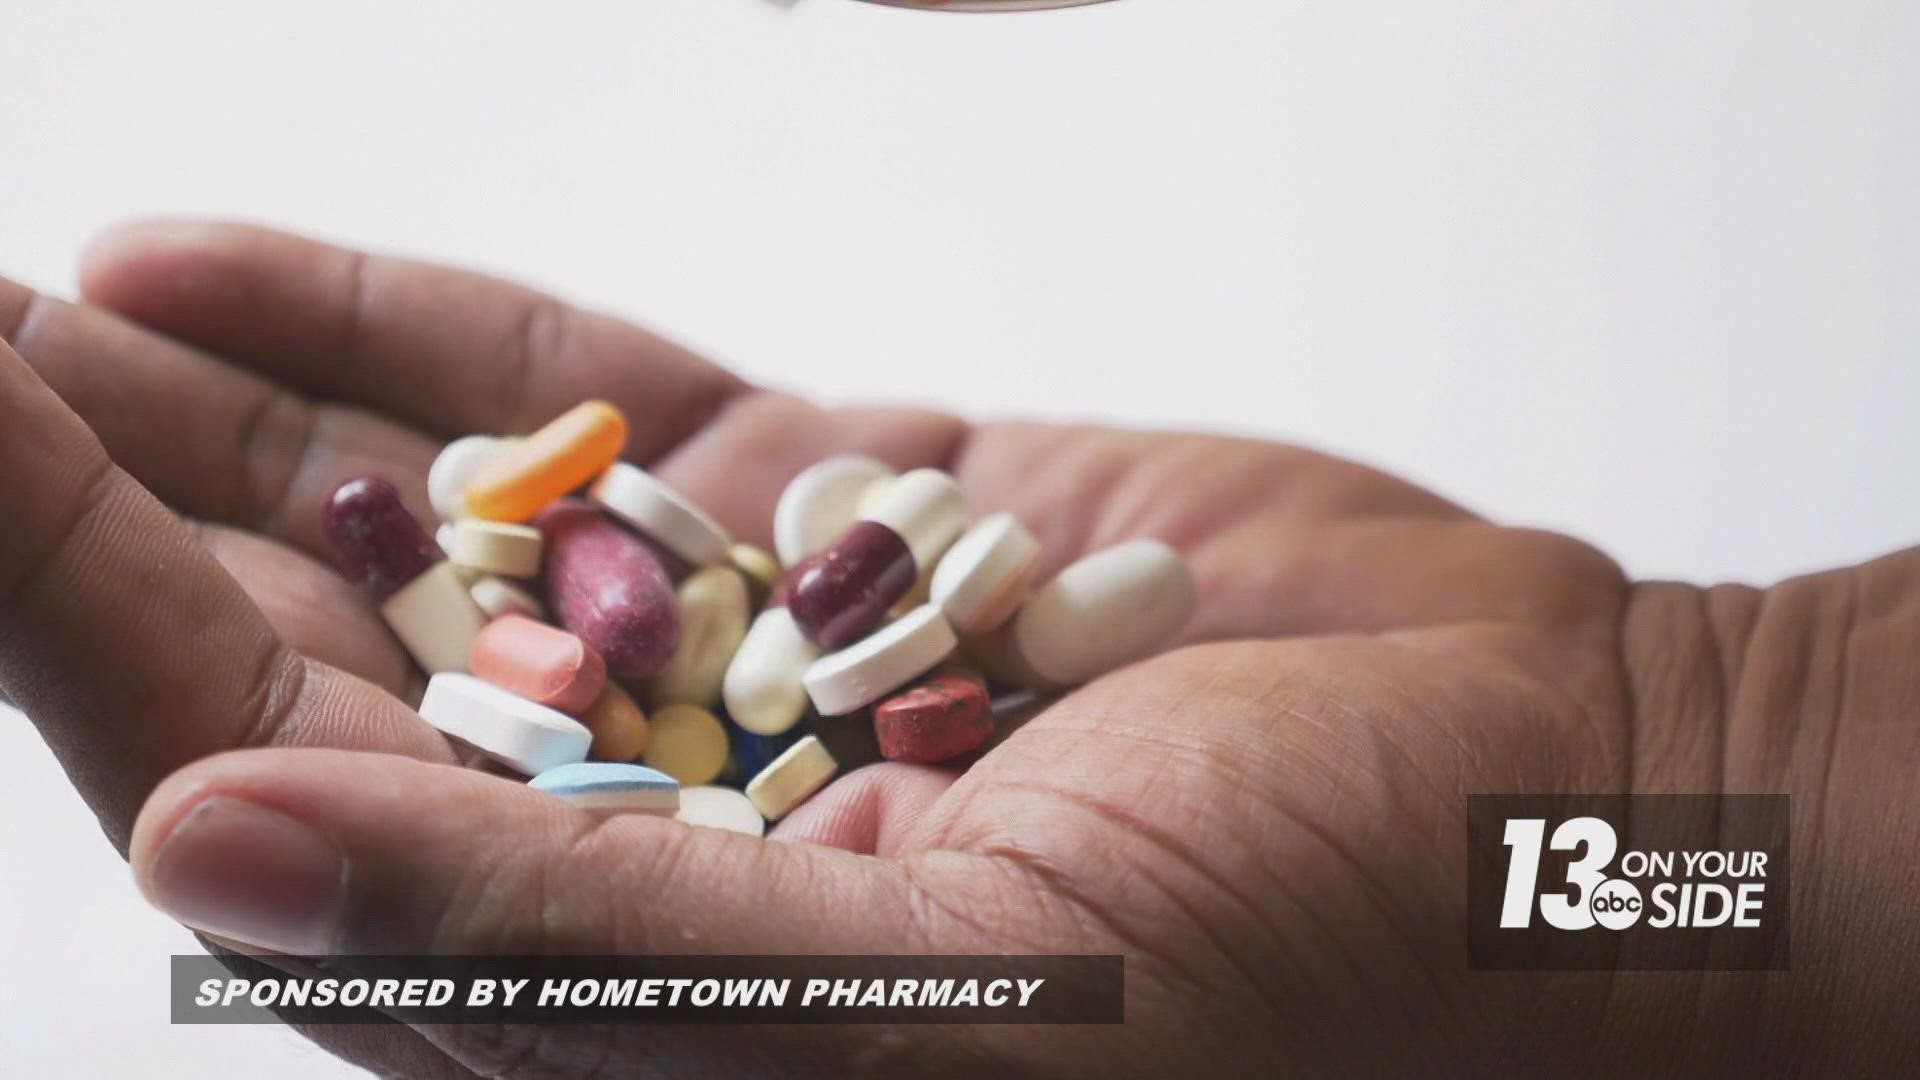 We sat down with HomeTown Pharmacy President Jonathan Grice and Director of Pharmacy Derek VanGalder to talk about their role in helping folks feel better.